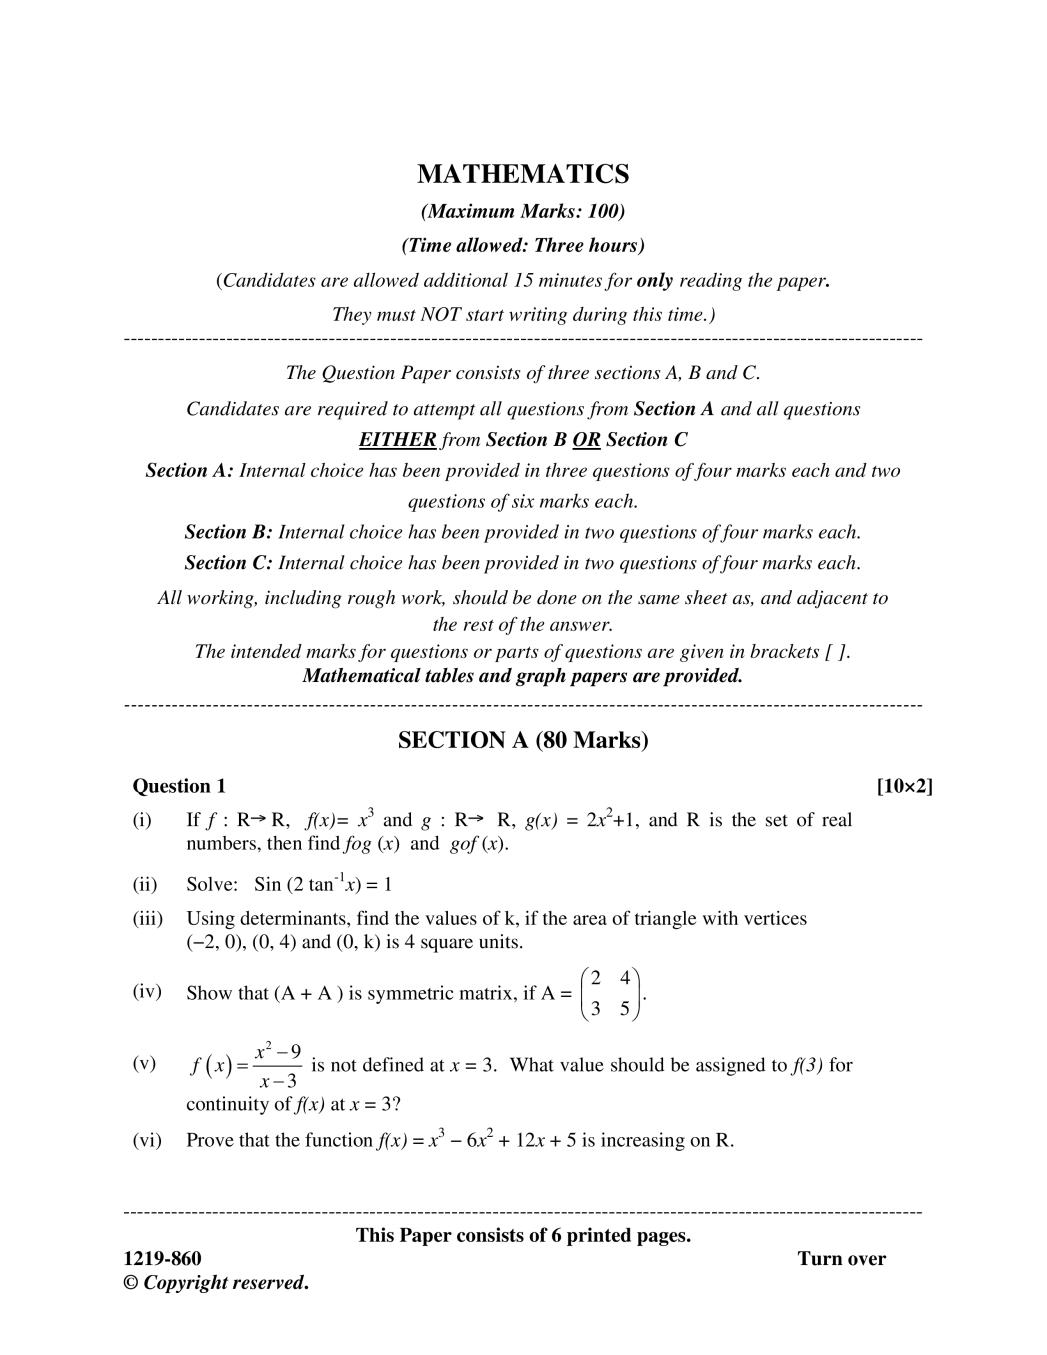 ISC Class 12 Question Paper 2019 for Mathematics  - Page 1